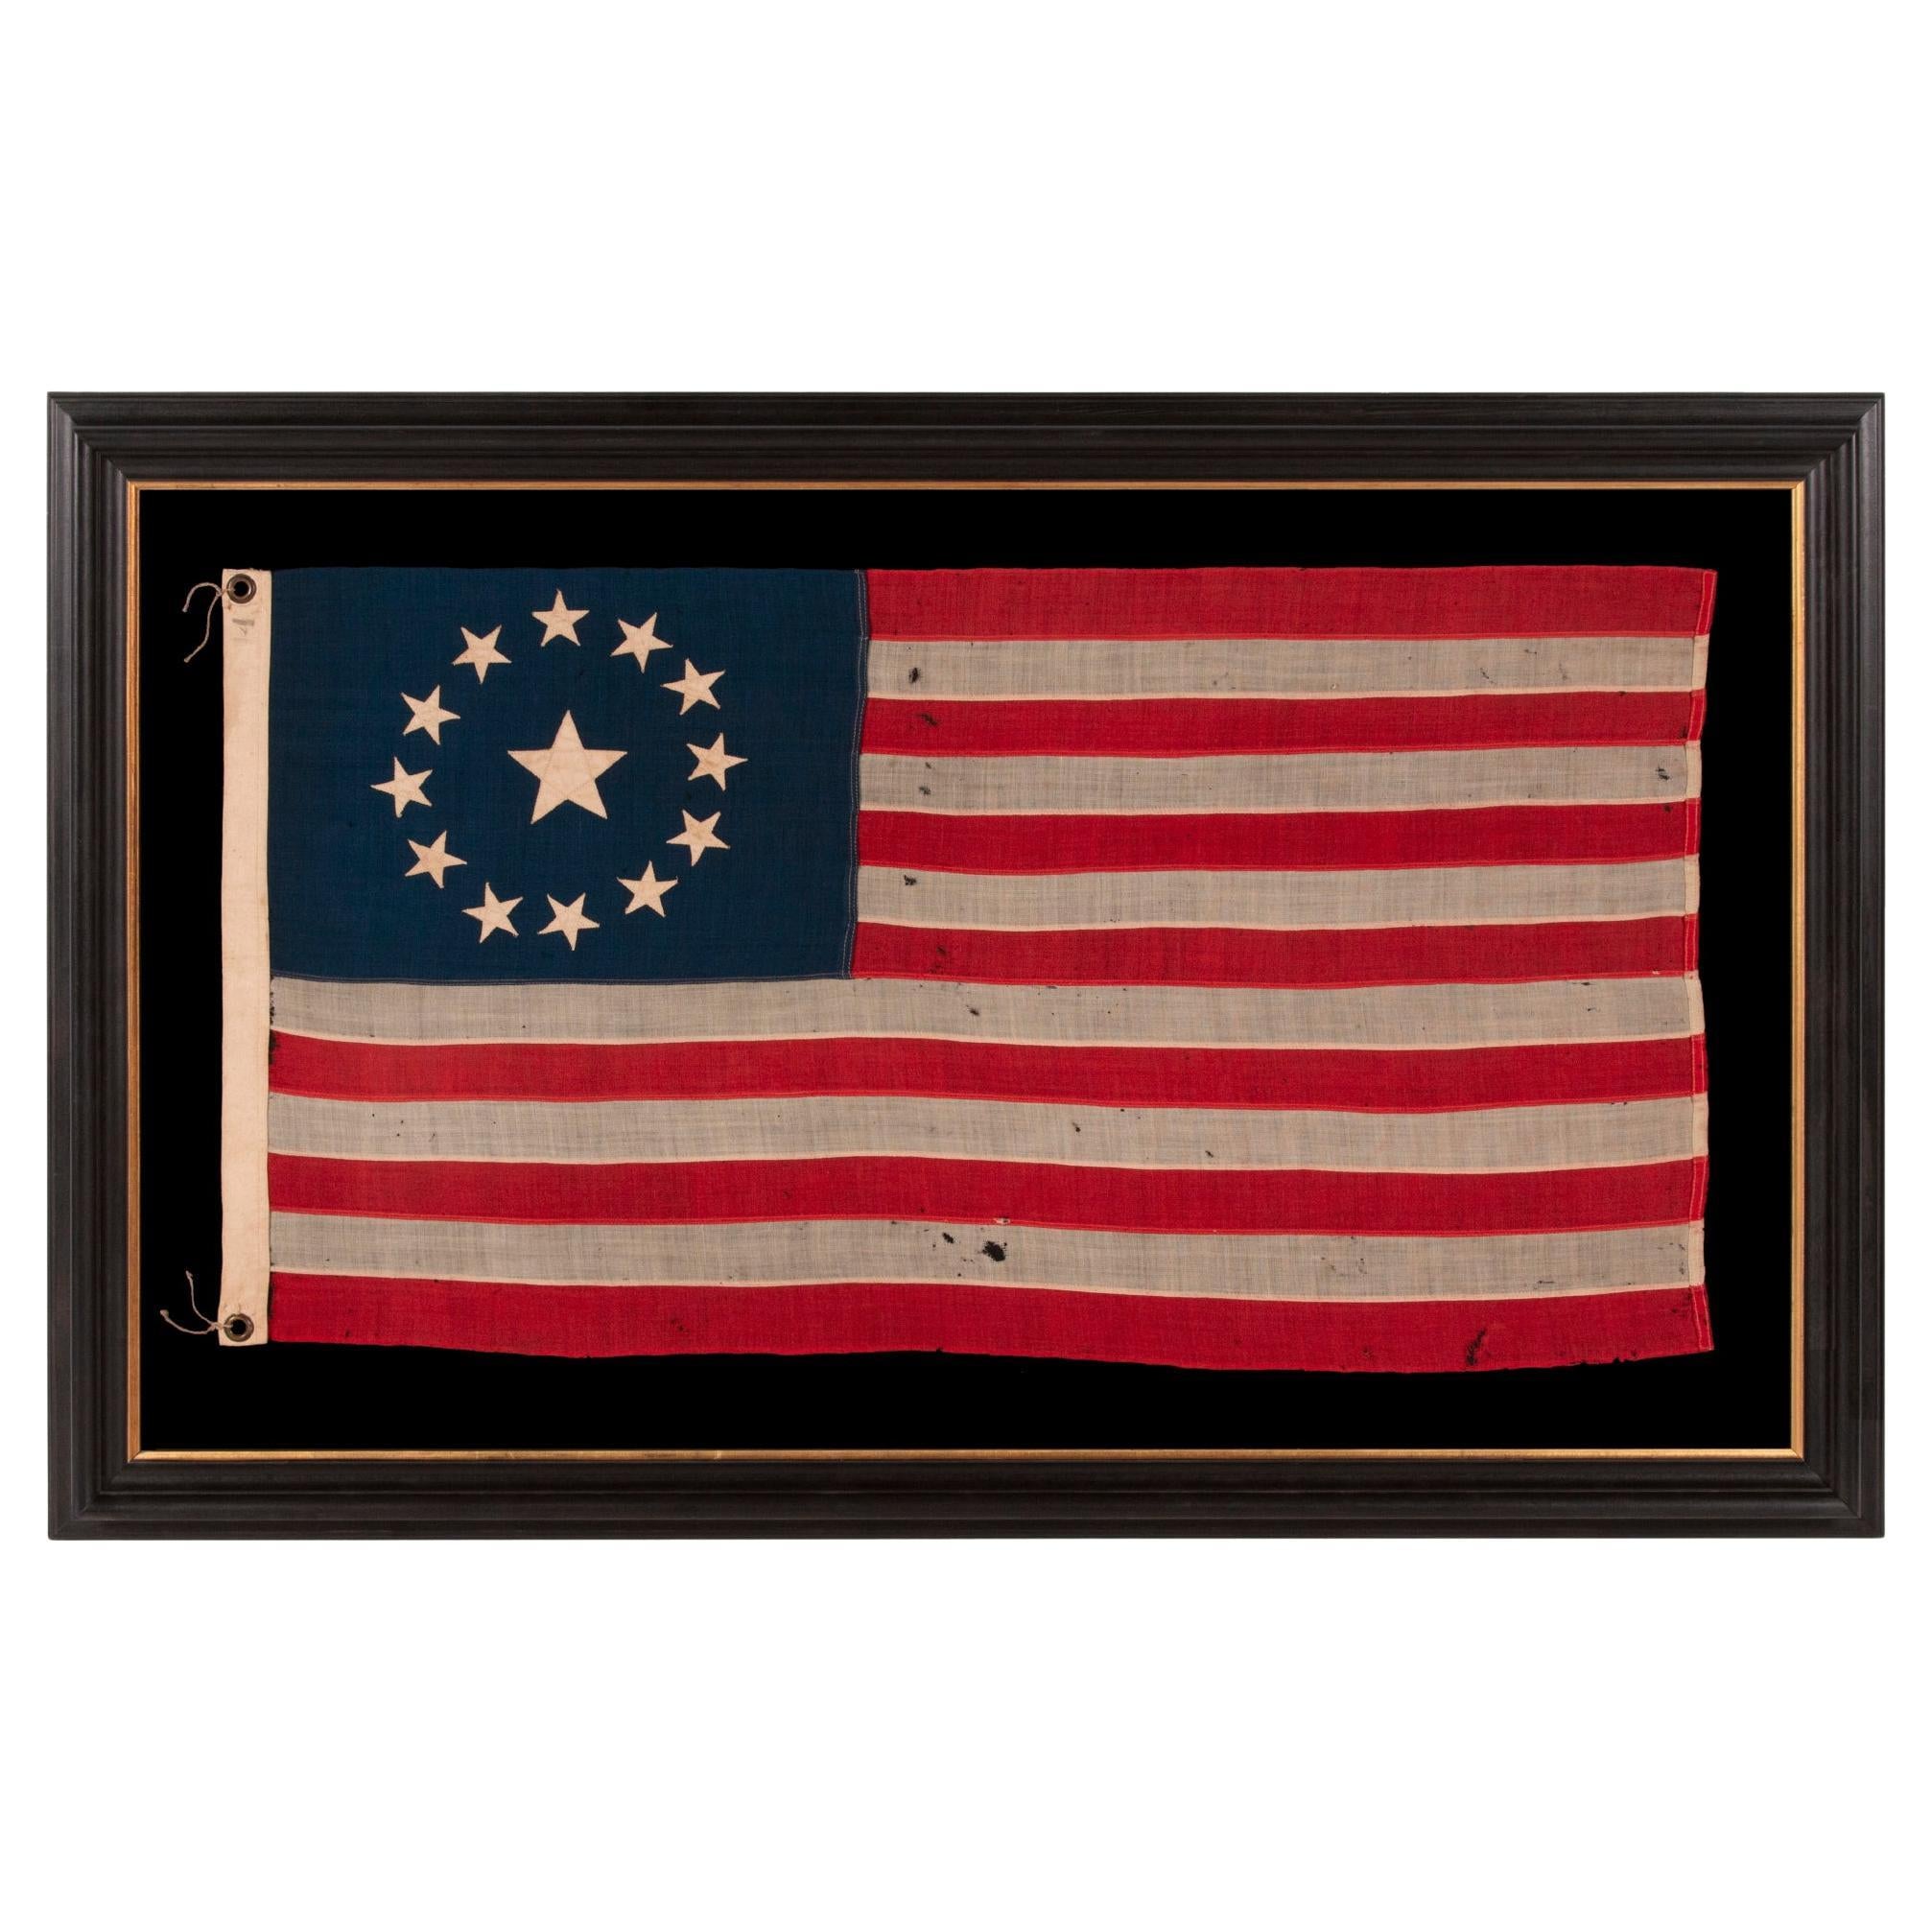 13 Star Antique American Flag, 3rd Maryland Design, Beautiful, Elongated Profile